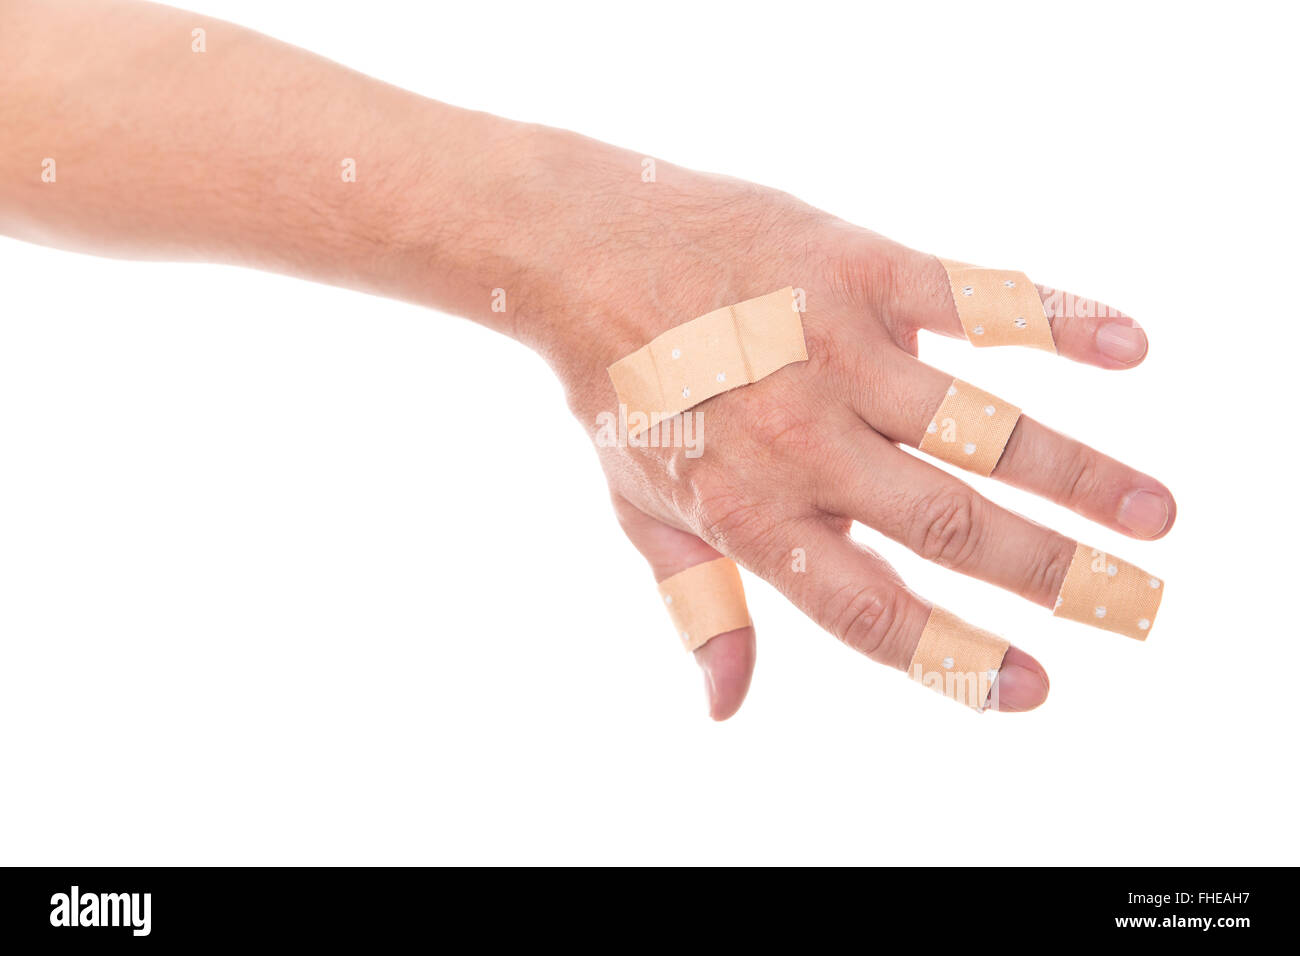 Hand putting adhesive bandage or plaster. band-aid on a cut. isolated on  white. Stock Photo by ©wittayayut 104522708